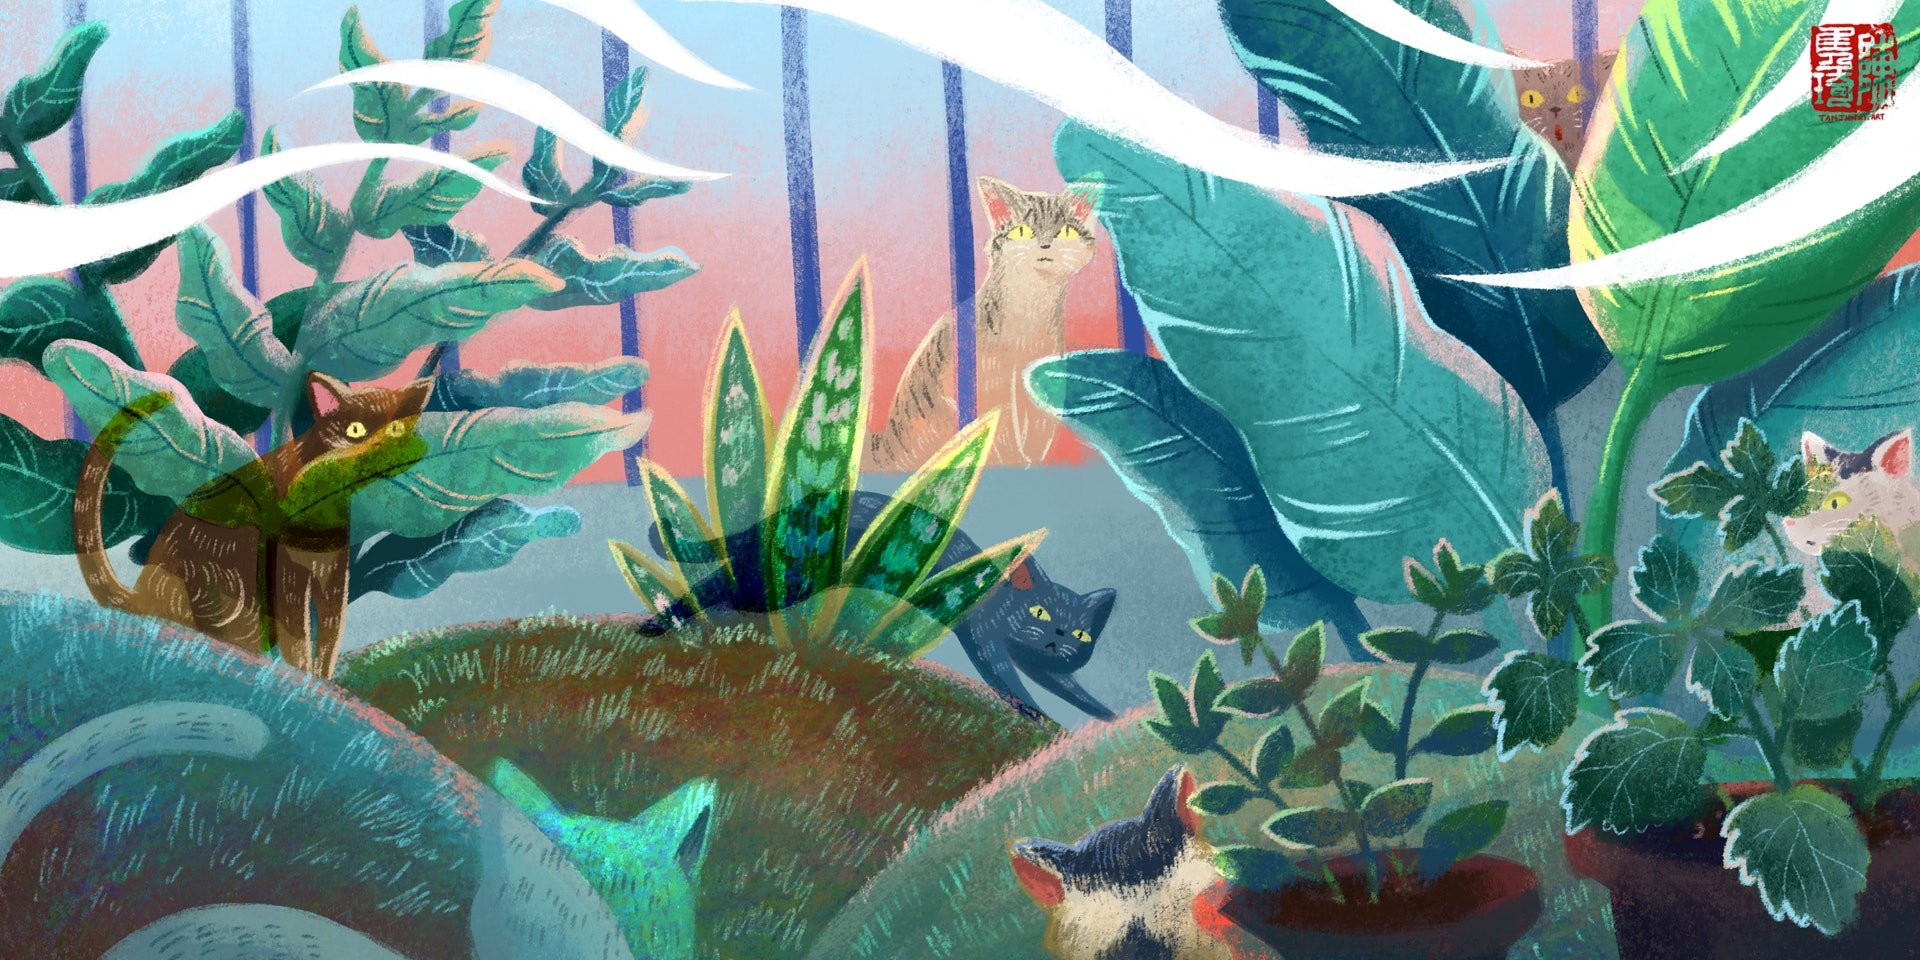 Digital painting of a bunch of cats in a tropical garden with broadleaf plants, in a textured, graphic style. Some cats are hidden behind foliage or sitting behind metal grills and peering at the viewer, others have their backs facing the viewer looking into the garden. There are some pots of herbs in the foreground on the right.